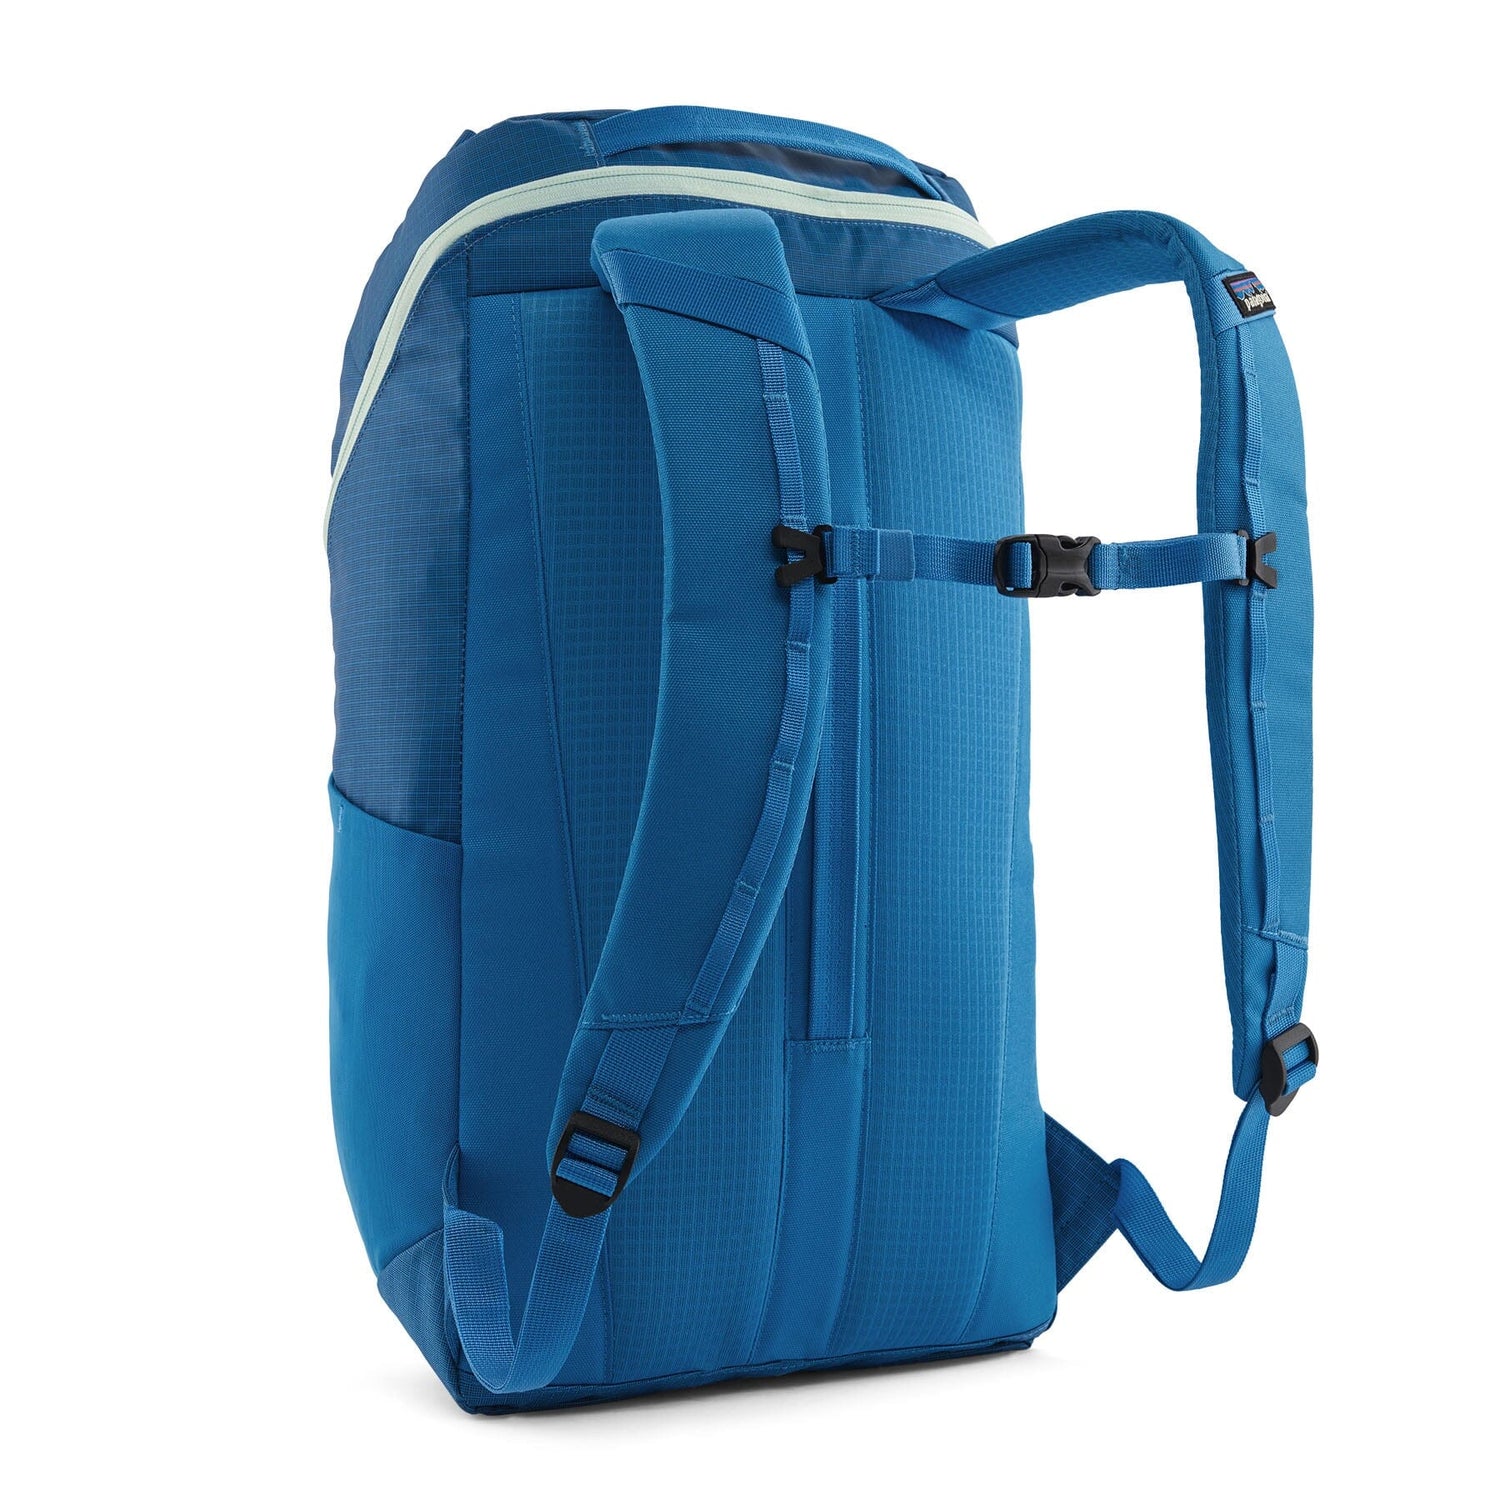 Patagonia - Black Hole Pack 25L - 100% Recycled Polyester - Weekendbee - sustainable sportswear